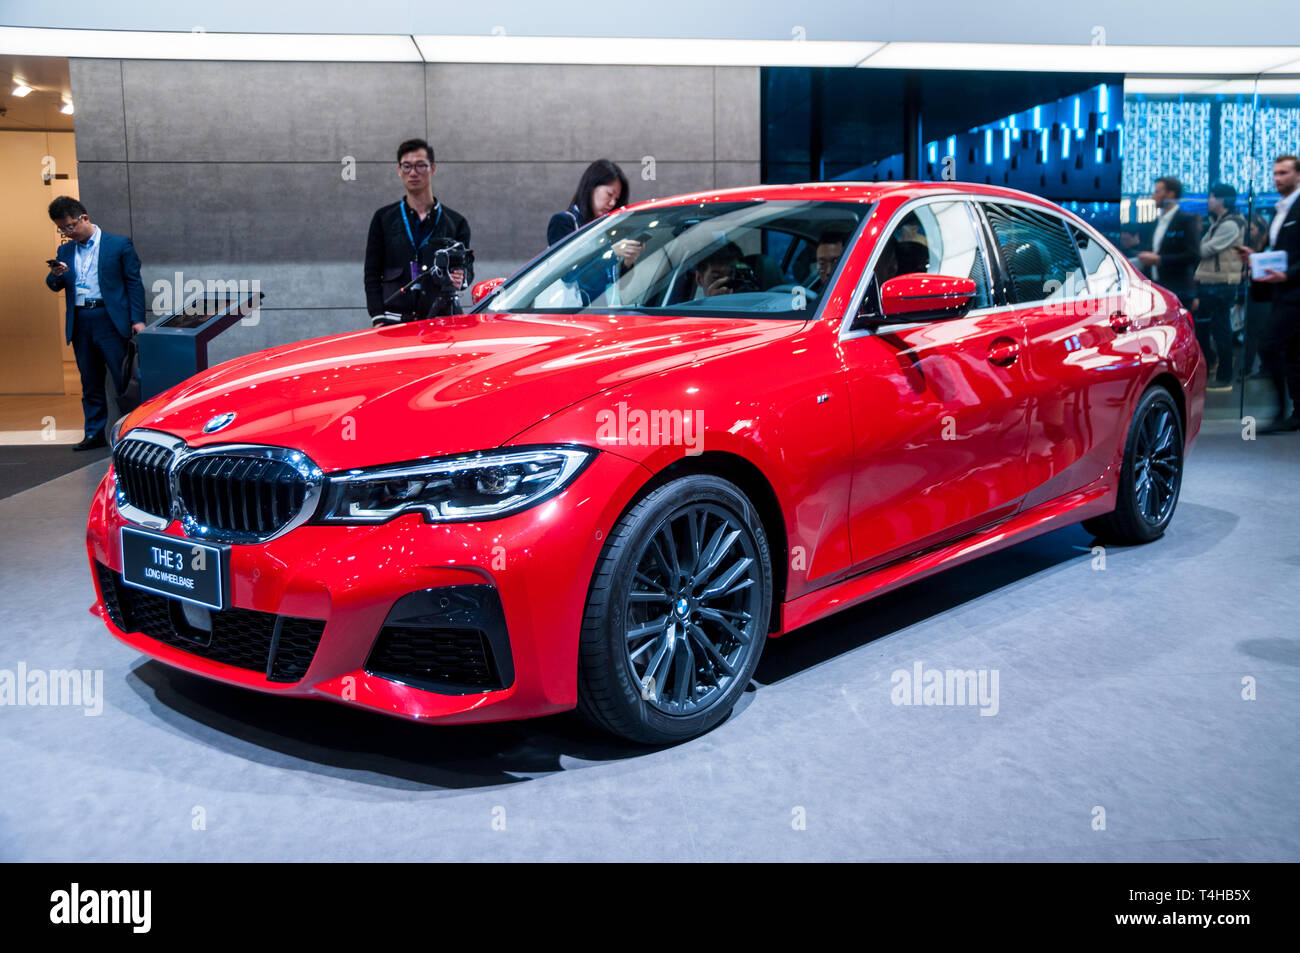 https://c8.alamy.com/comp/T4HB5X/the-china-only-long-wheelbase-version-of-the-seventh-generation-g20-bmw-3-series-unveiled-at-the-2019-shanghai-auto-show-T4HB5X.jpg